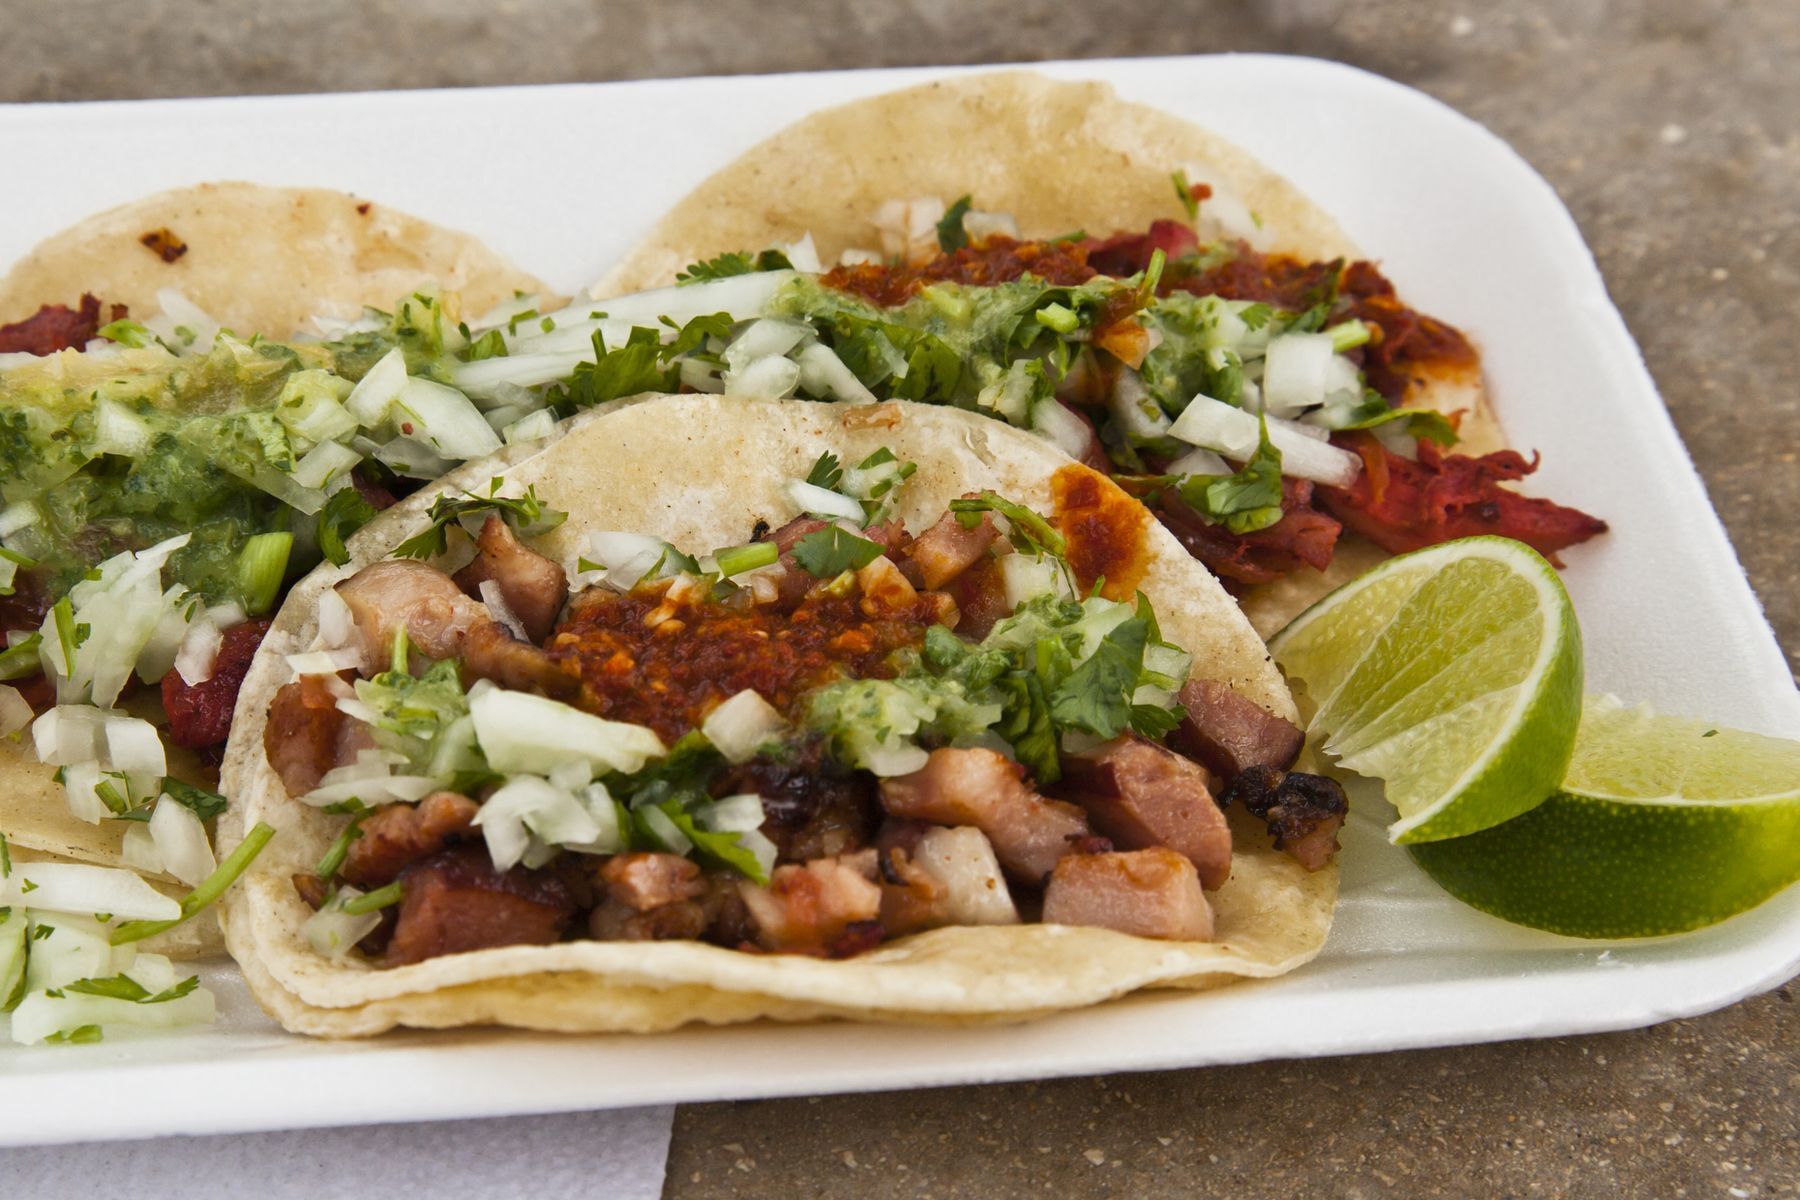 <p>Mexicans have hit the nail on the head with their tacos. This ideal street food can now be found all over the world. Whether filled with fish, meat, vegetables, or seafood, Mexican tacos will definitely be served with a <a href="https://www.masterclass.com/articles/a-guide-to-authentic-mexican-tacos" rel="noreferrer noopener">wedge of lime, cilantro, and chopped onions, not to mention your choice of salsa verde or salsa rojo</a>.</p>